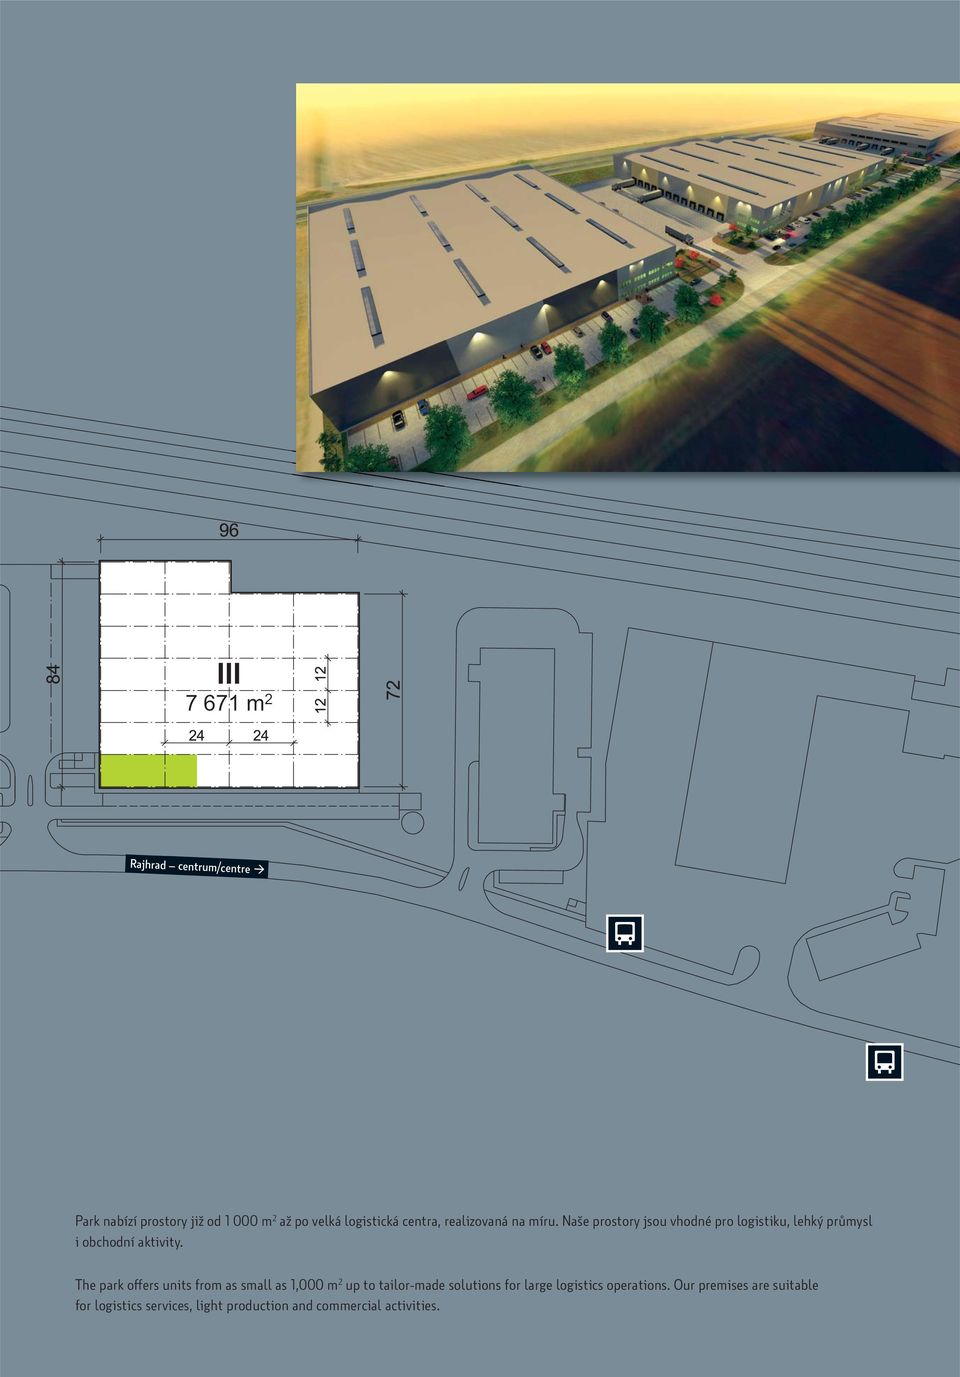 The park offers units from as small as 1,000 m 2 up to tailor-made solutions for large logistics